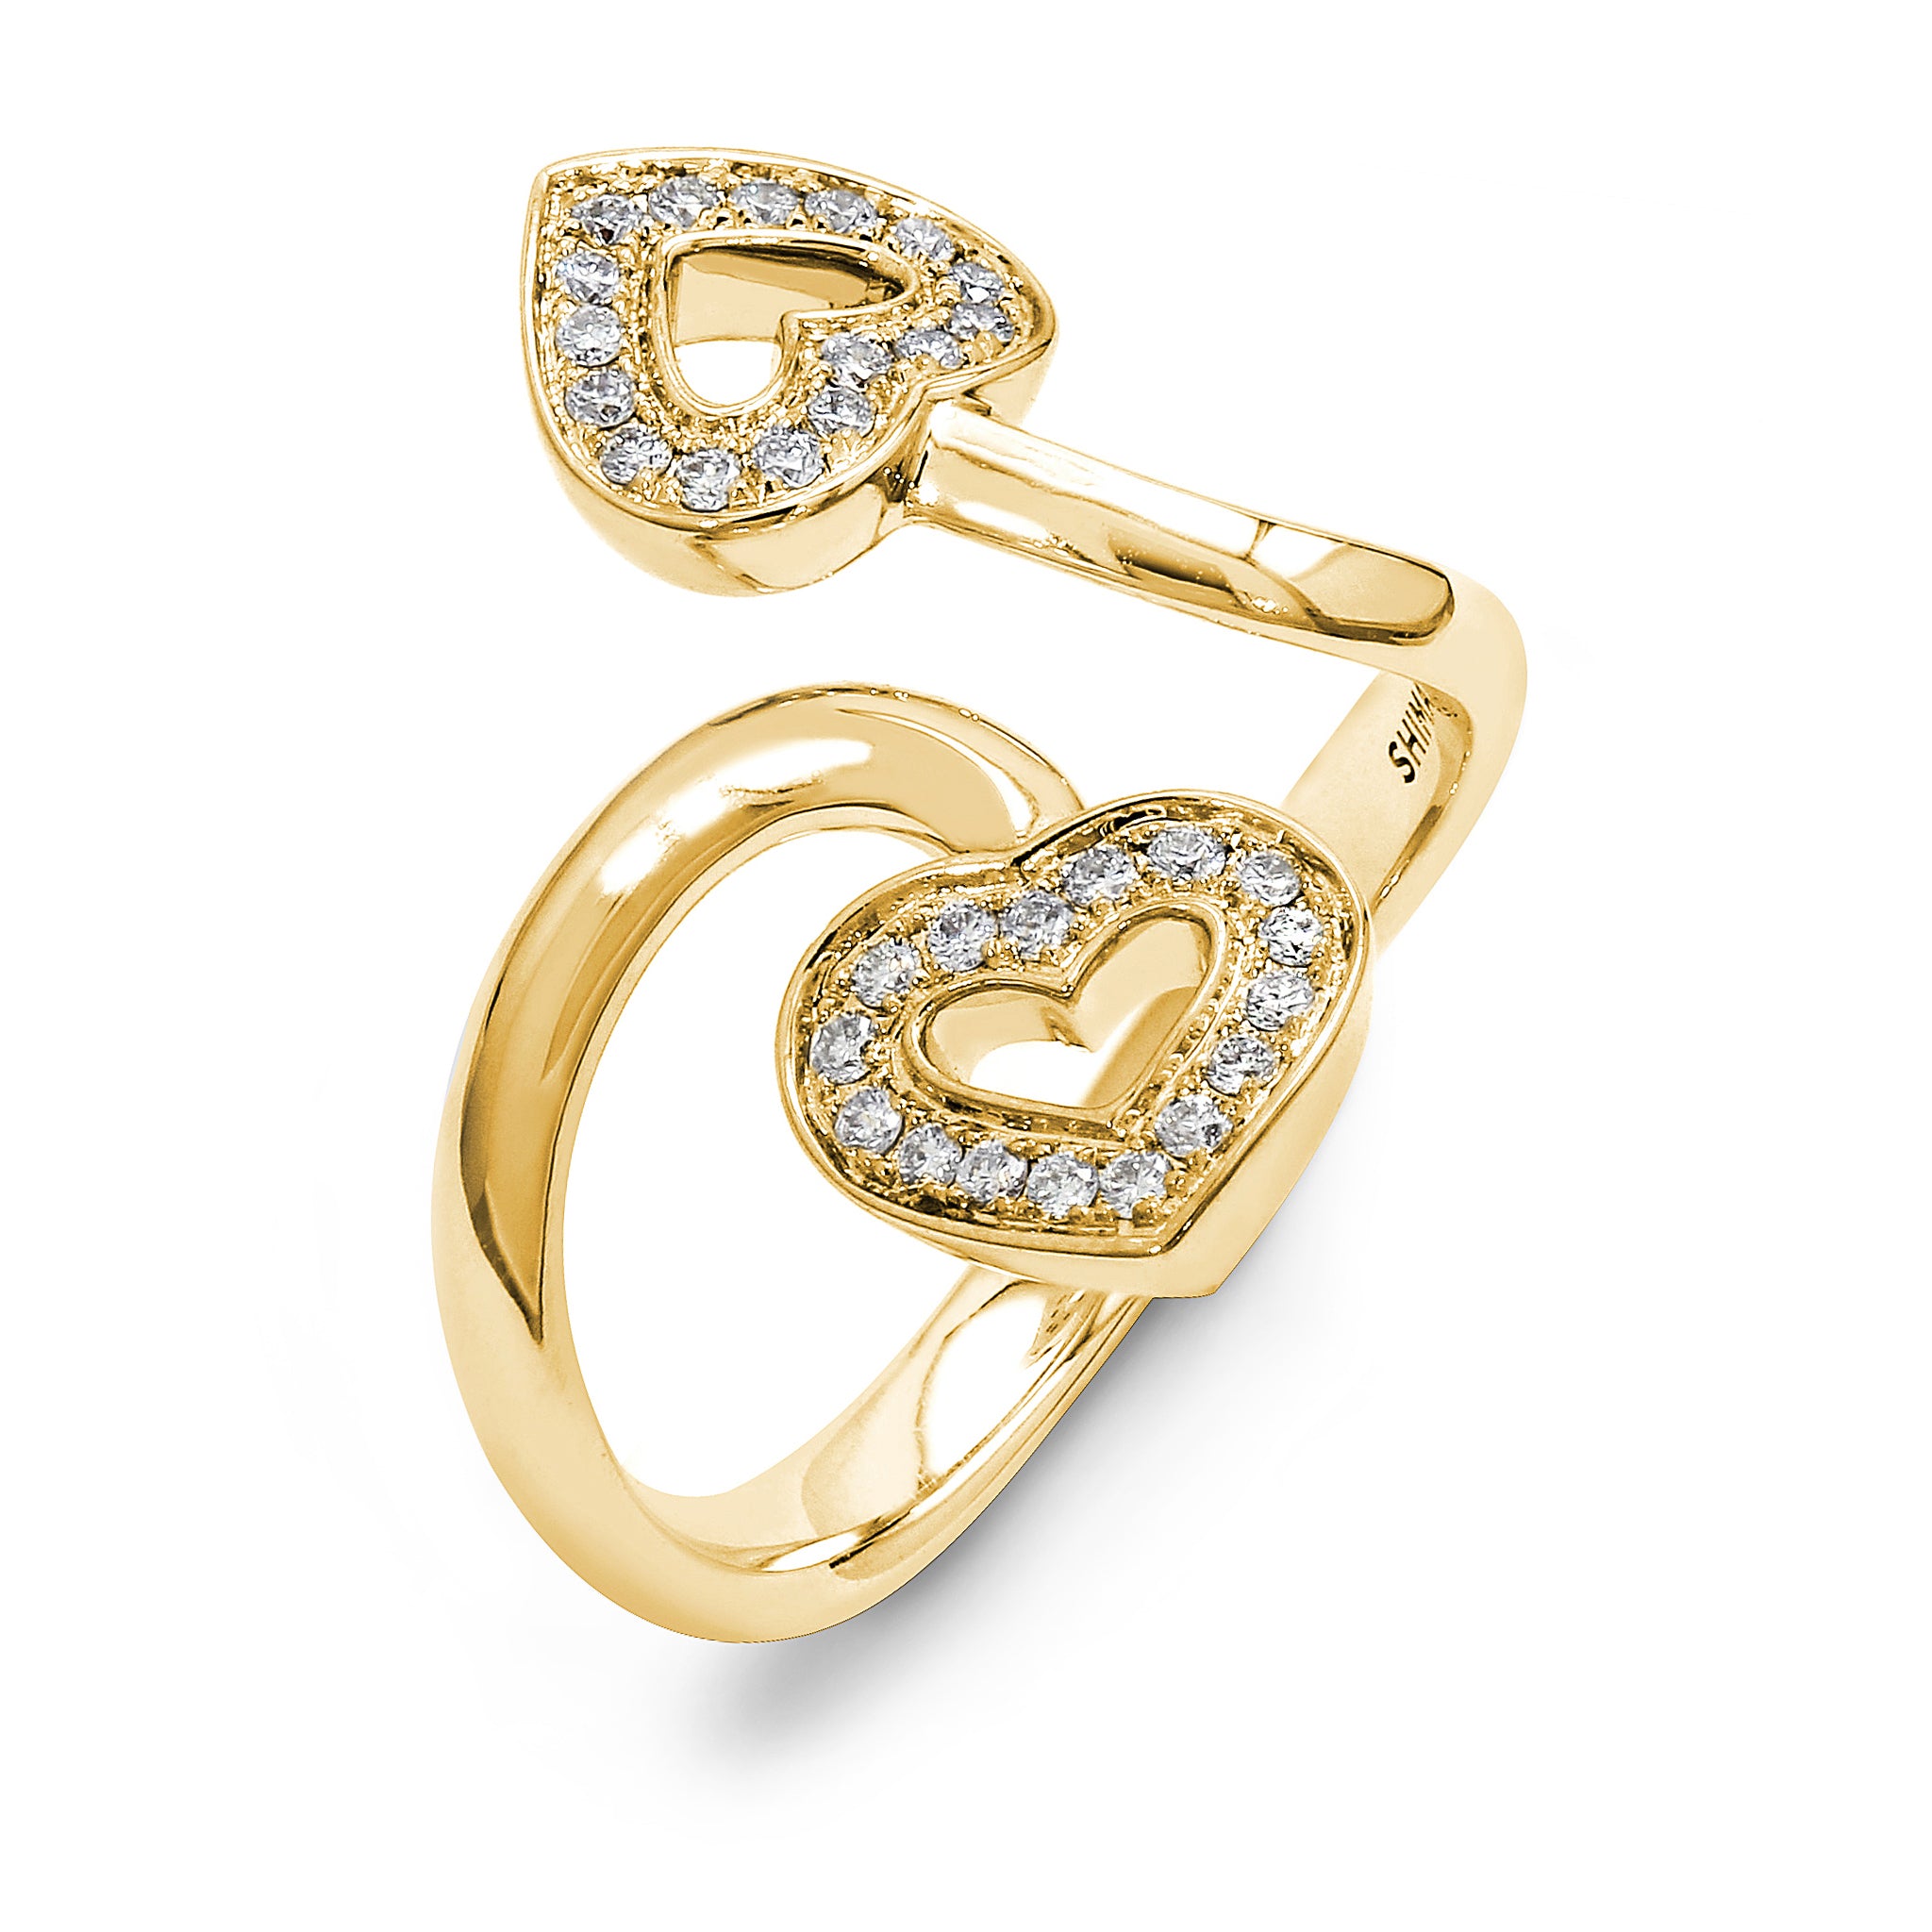 Shimansky - Two Hearts Twist Diamond Pave Ring 0.20ct crafted in 18K Yellow Gold